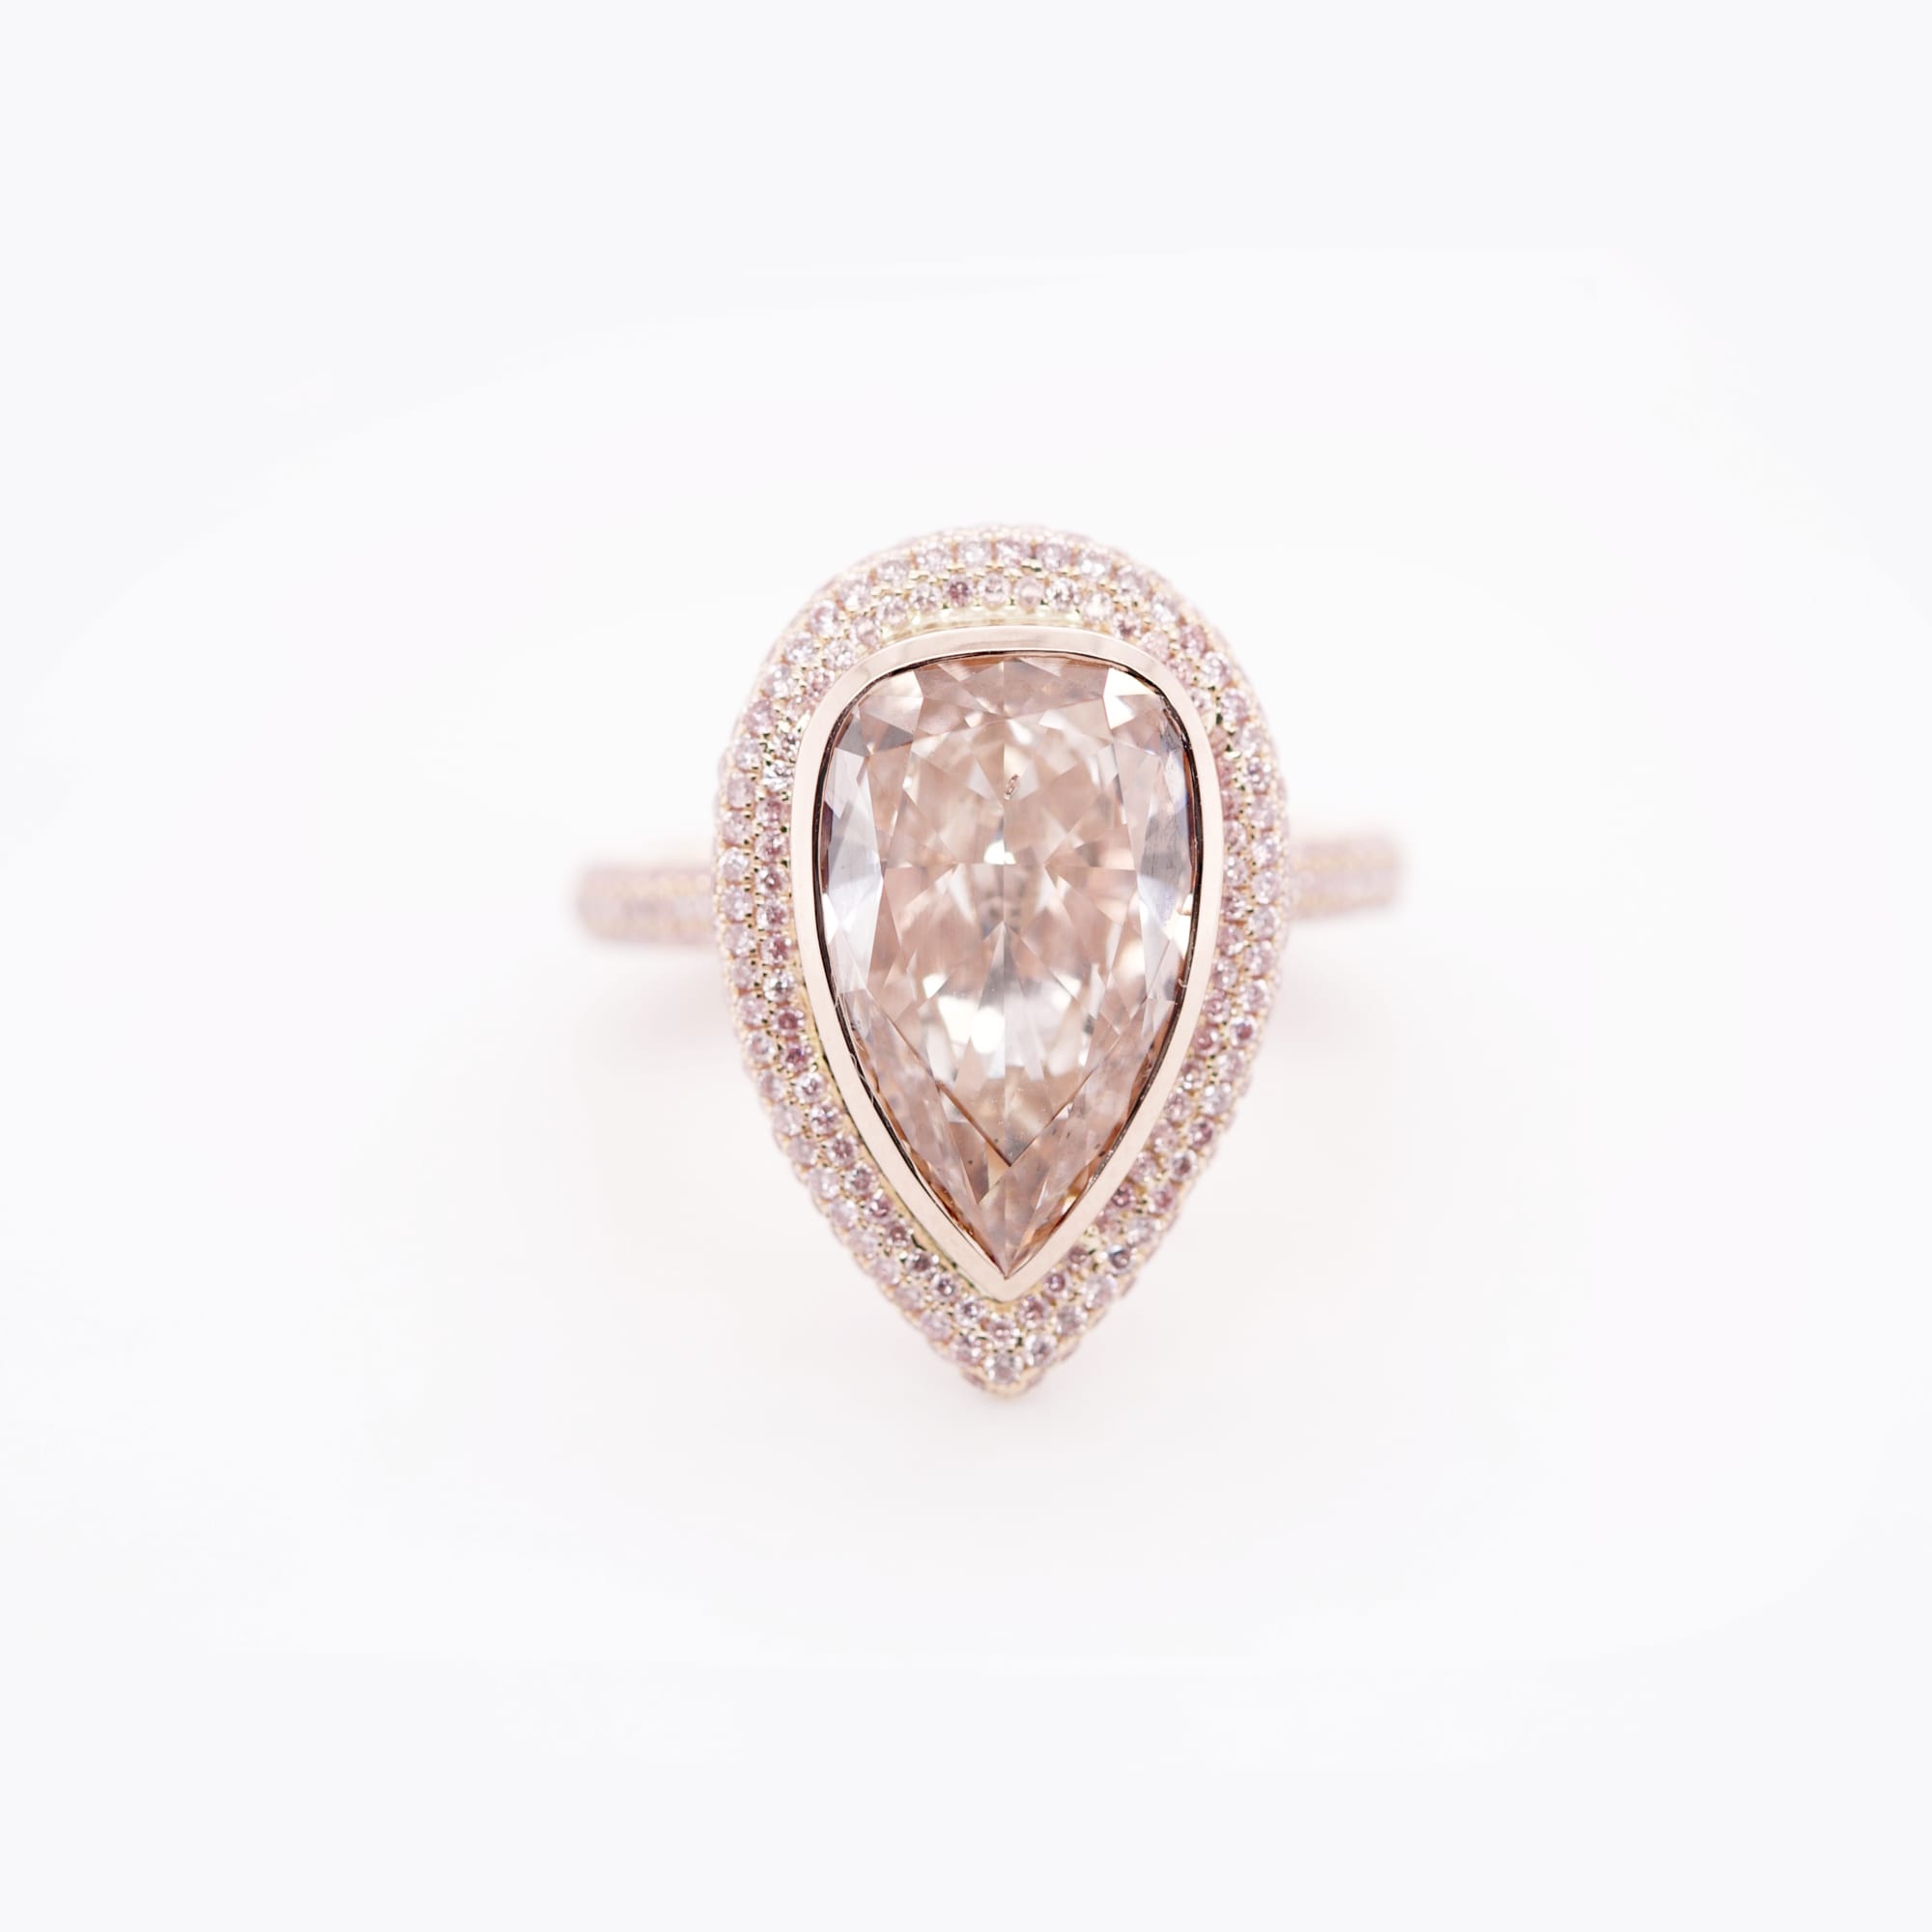 Rose Pear Diamond Ring with Pave of Pink Diamonds